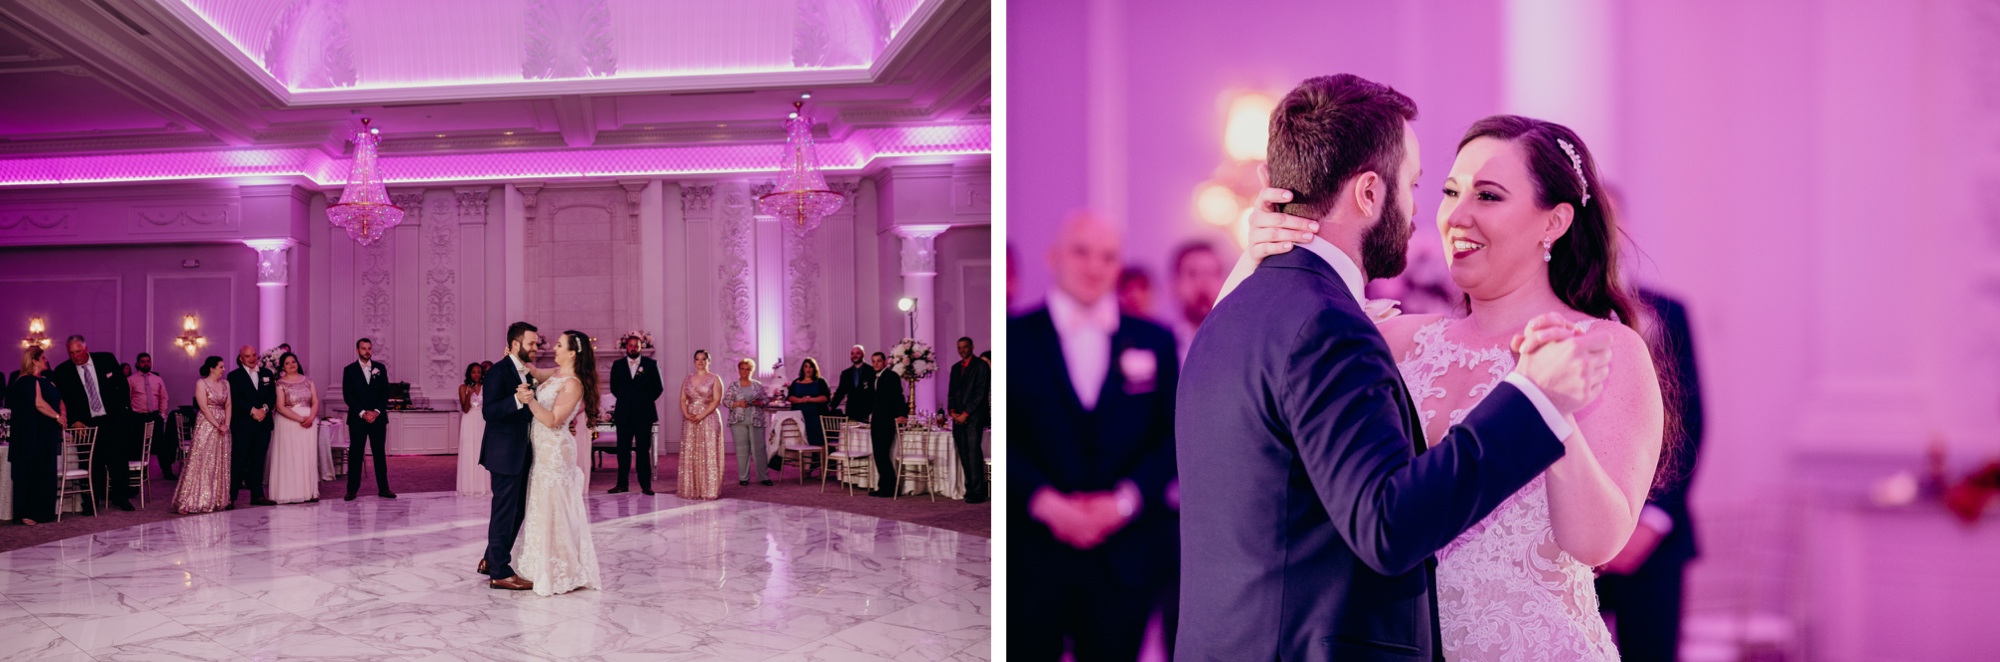 bride and groom share first dance during their wedding at valley regency in new jersey